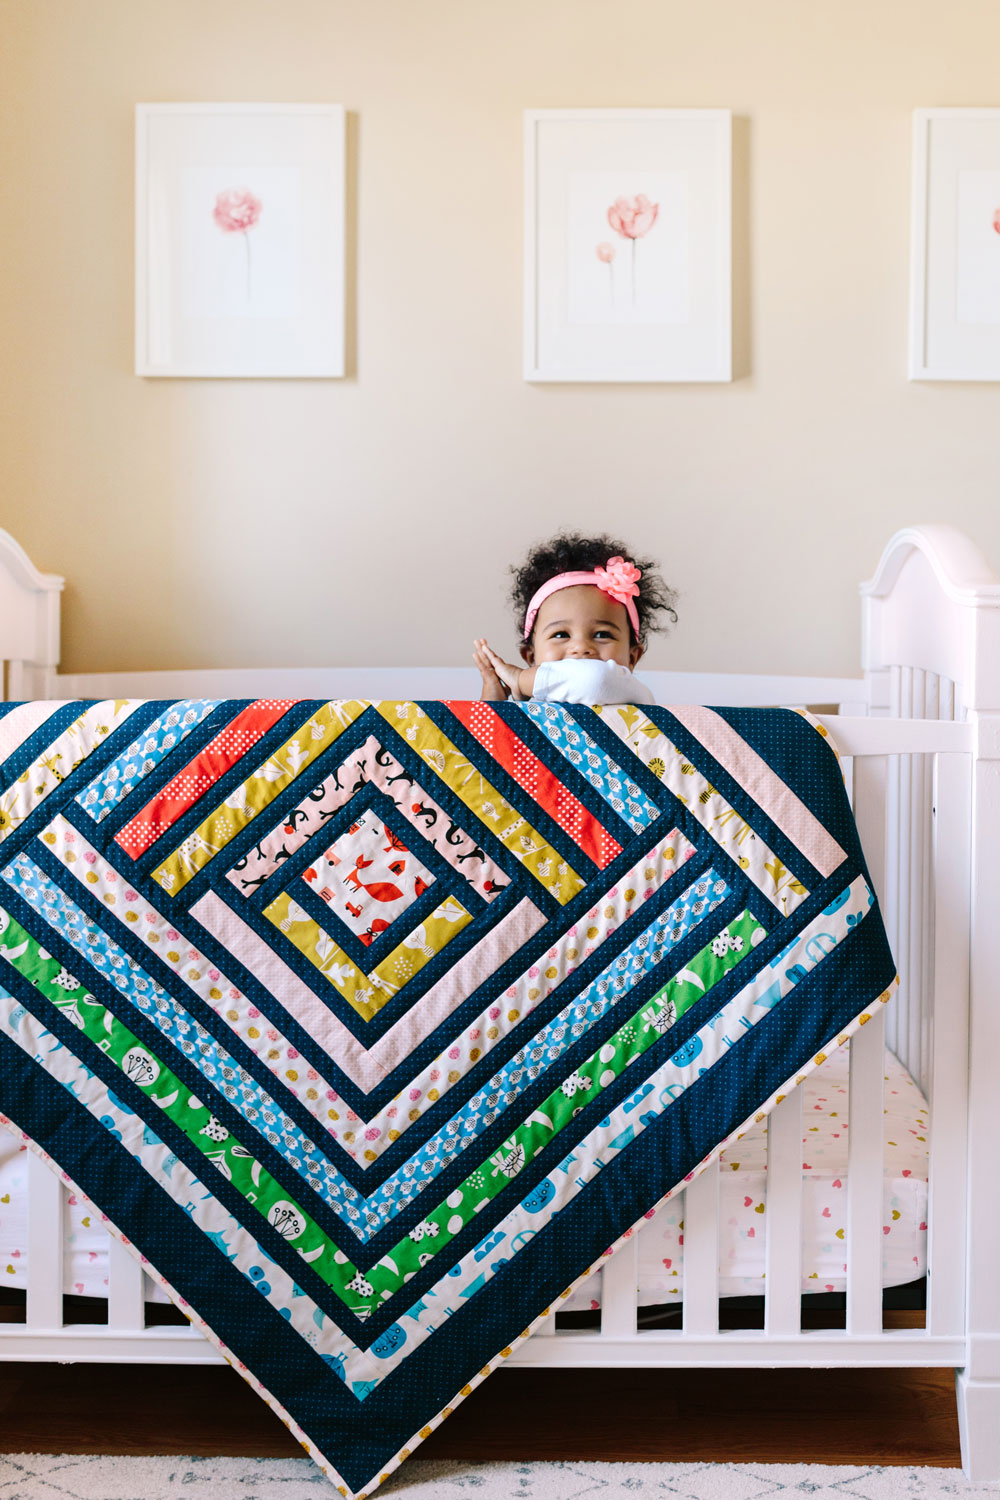 This 4-step guide will help you plan your quilts this year and maximize your productivity! A clear plan is the best way to have fun and get creative. suzyquilts.com #babyquilt